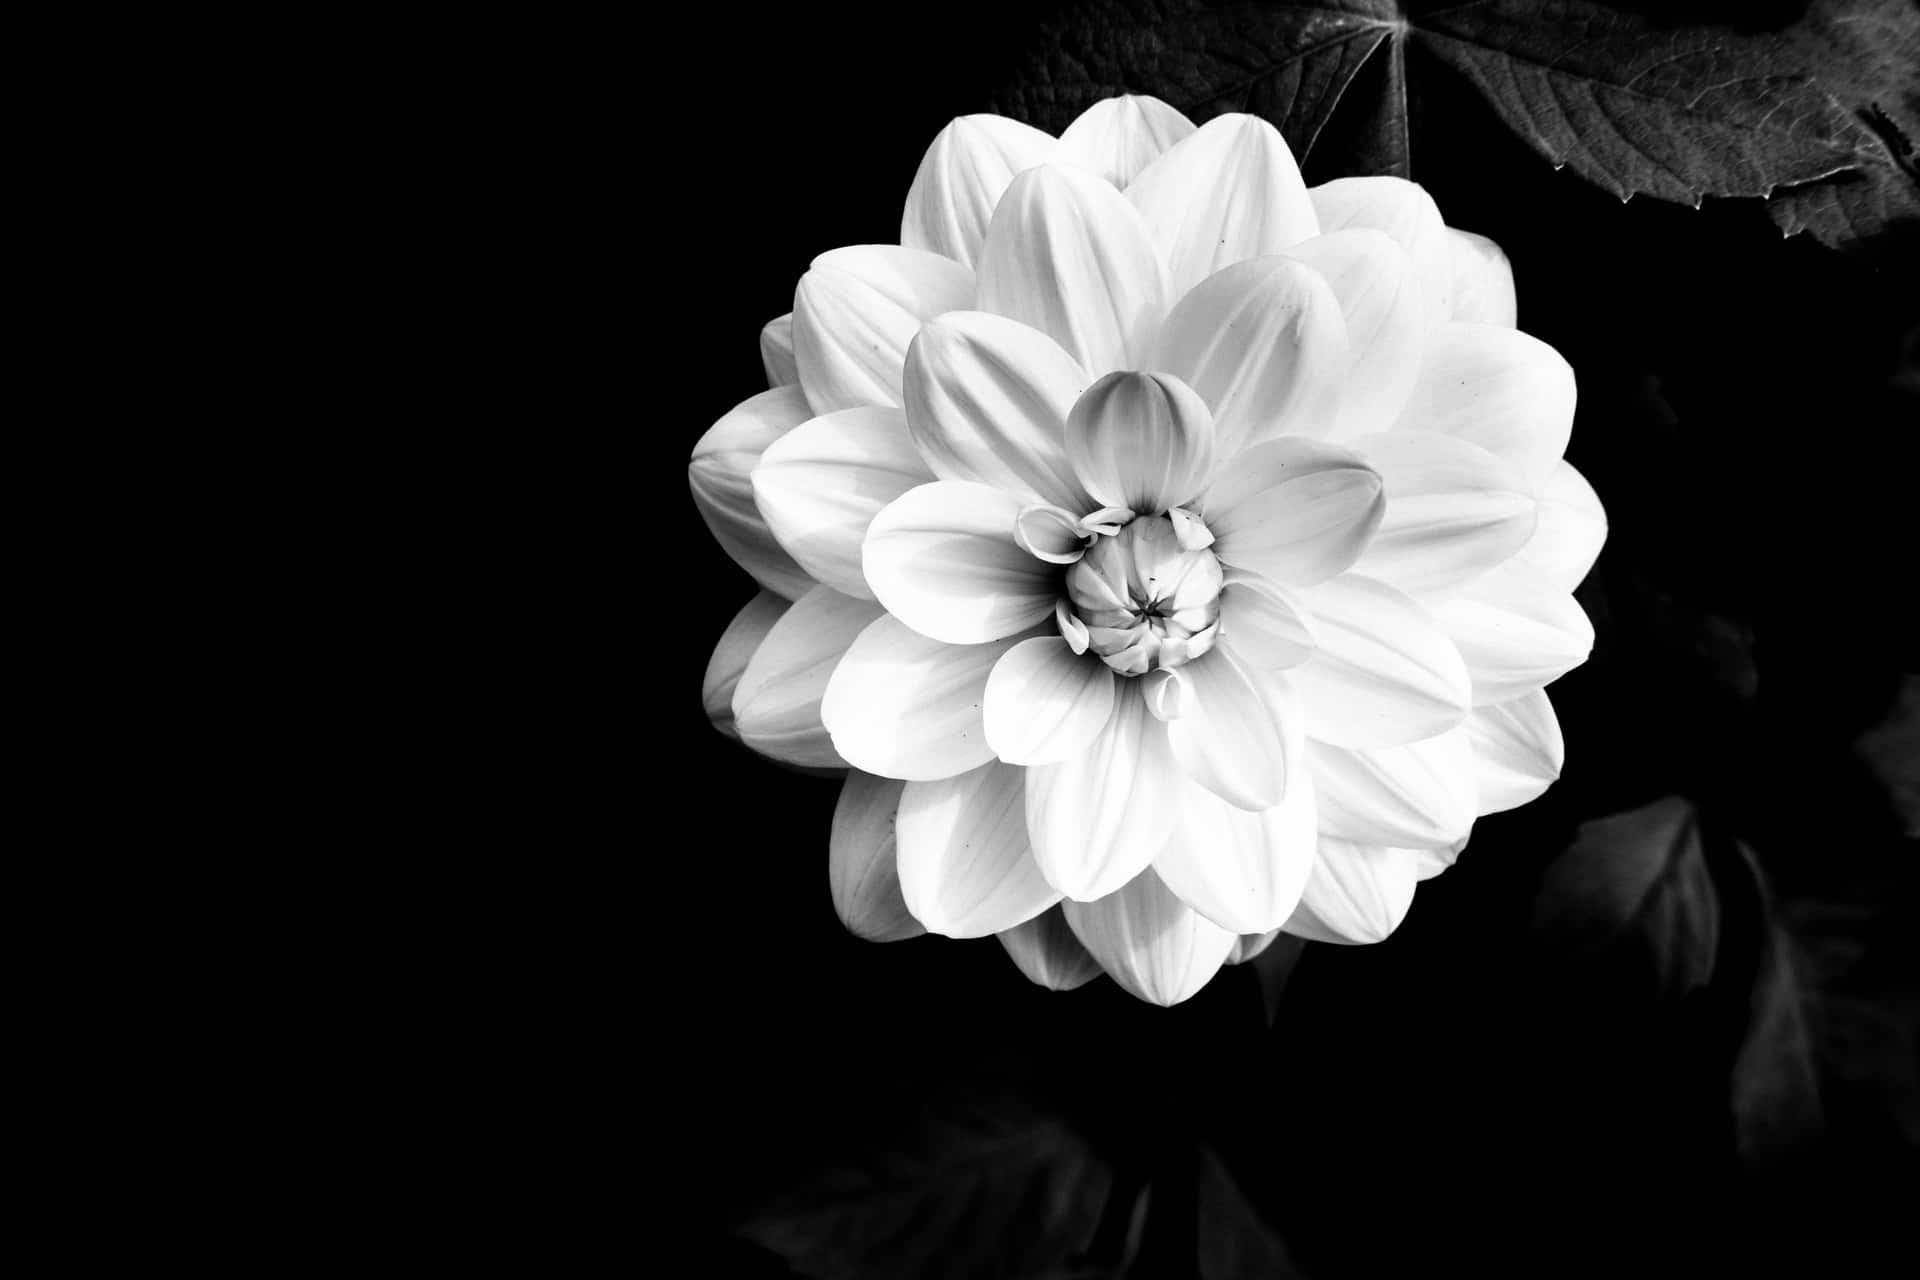 Download An Intricate Black and White Flower | Wallpapers.com